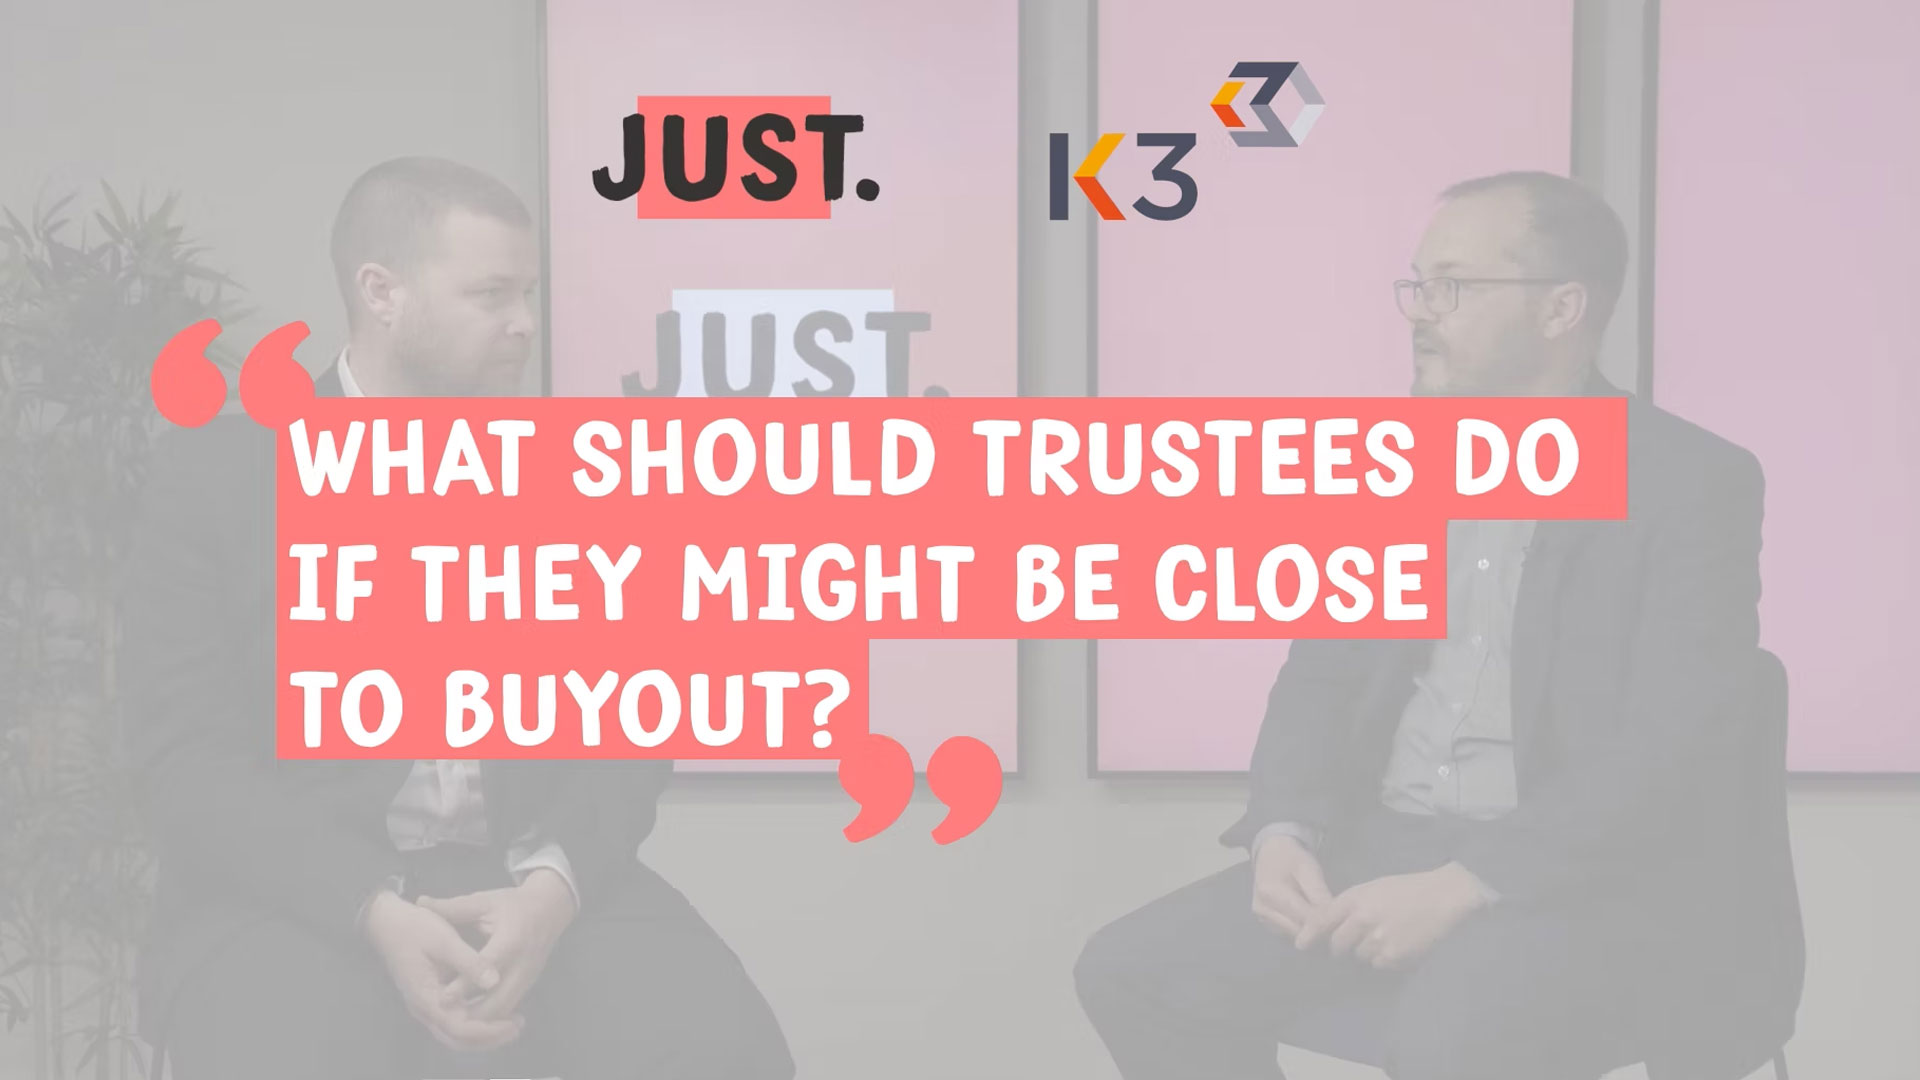 What should trustees do if they might be close to buyout?